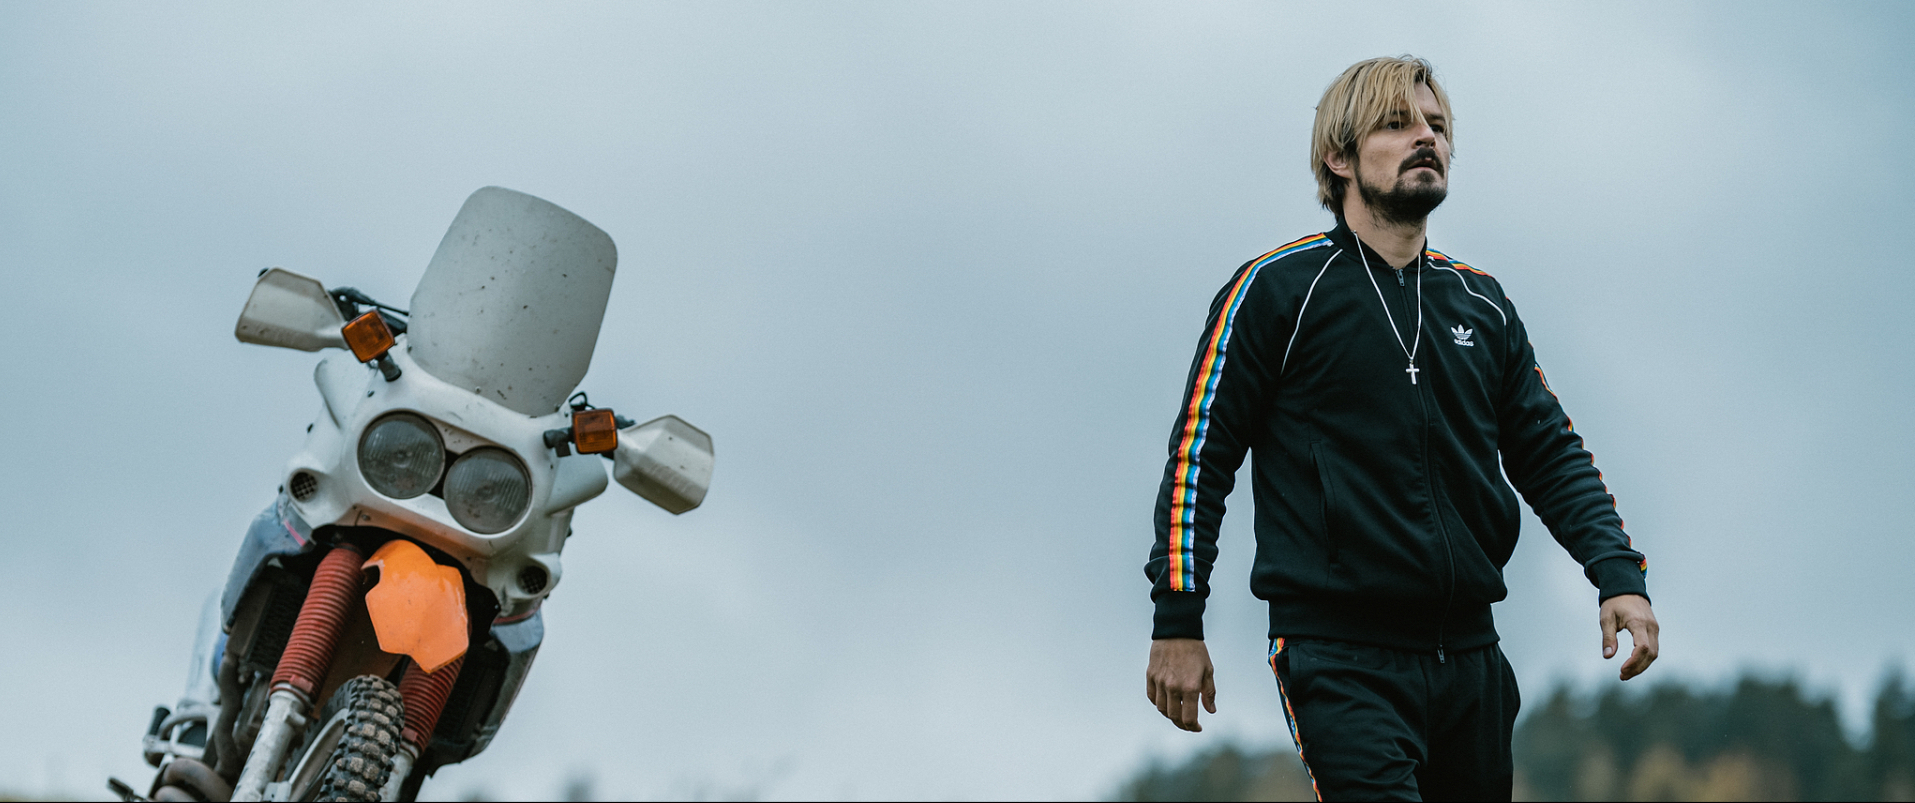 A still from All Our Fears. A man is walking away from a motobike. He is wearing an adidas tracksuit with pride flag stripes on the side and a large cross necklace.